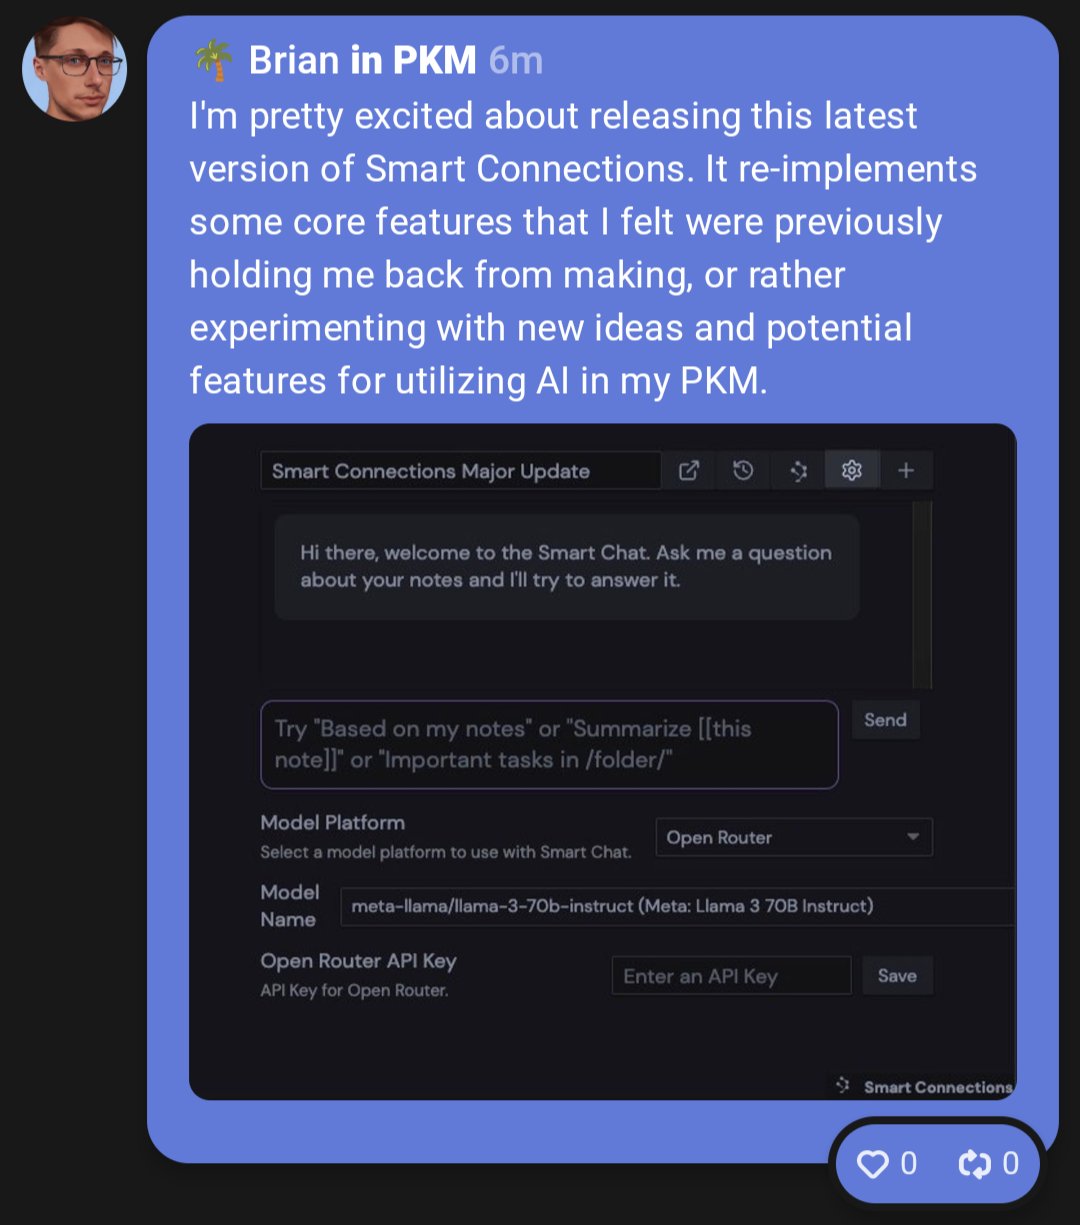 I'm excited about this release because it wraps up the process of re-writing some core features that will enable me to experiment with and add new features to Smart Connections.